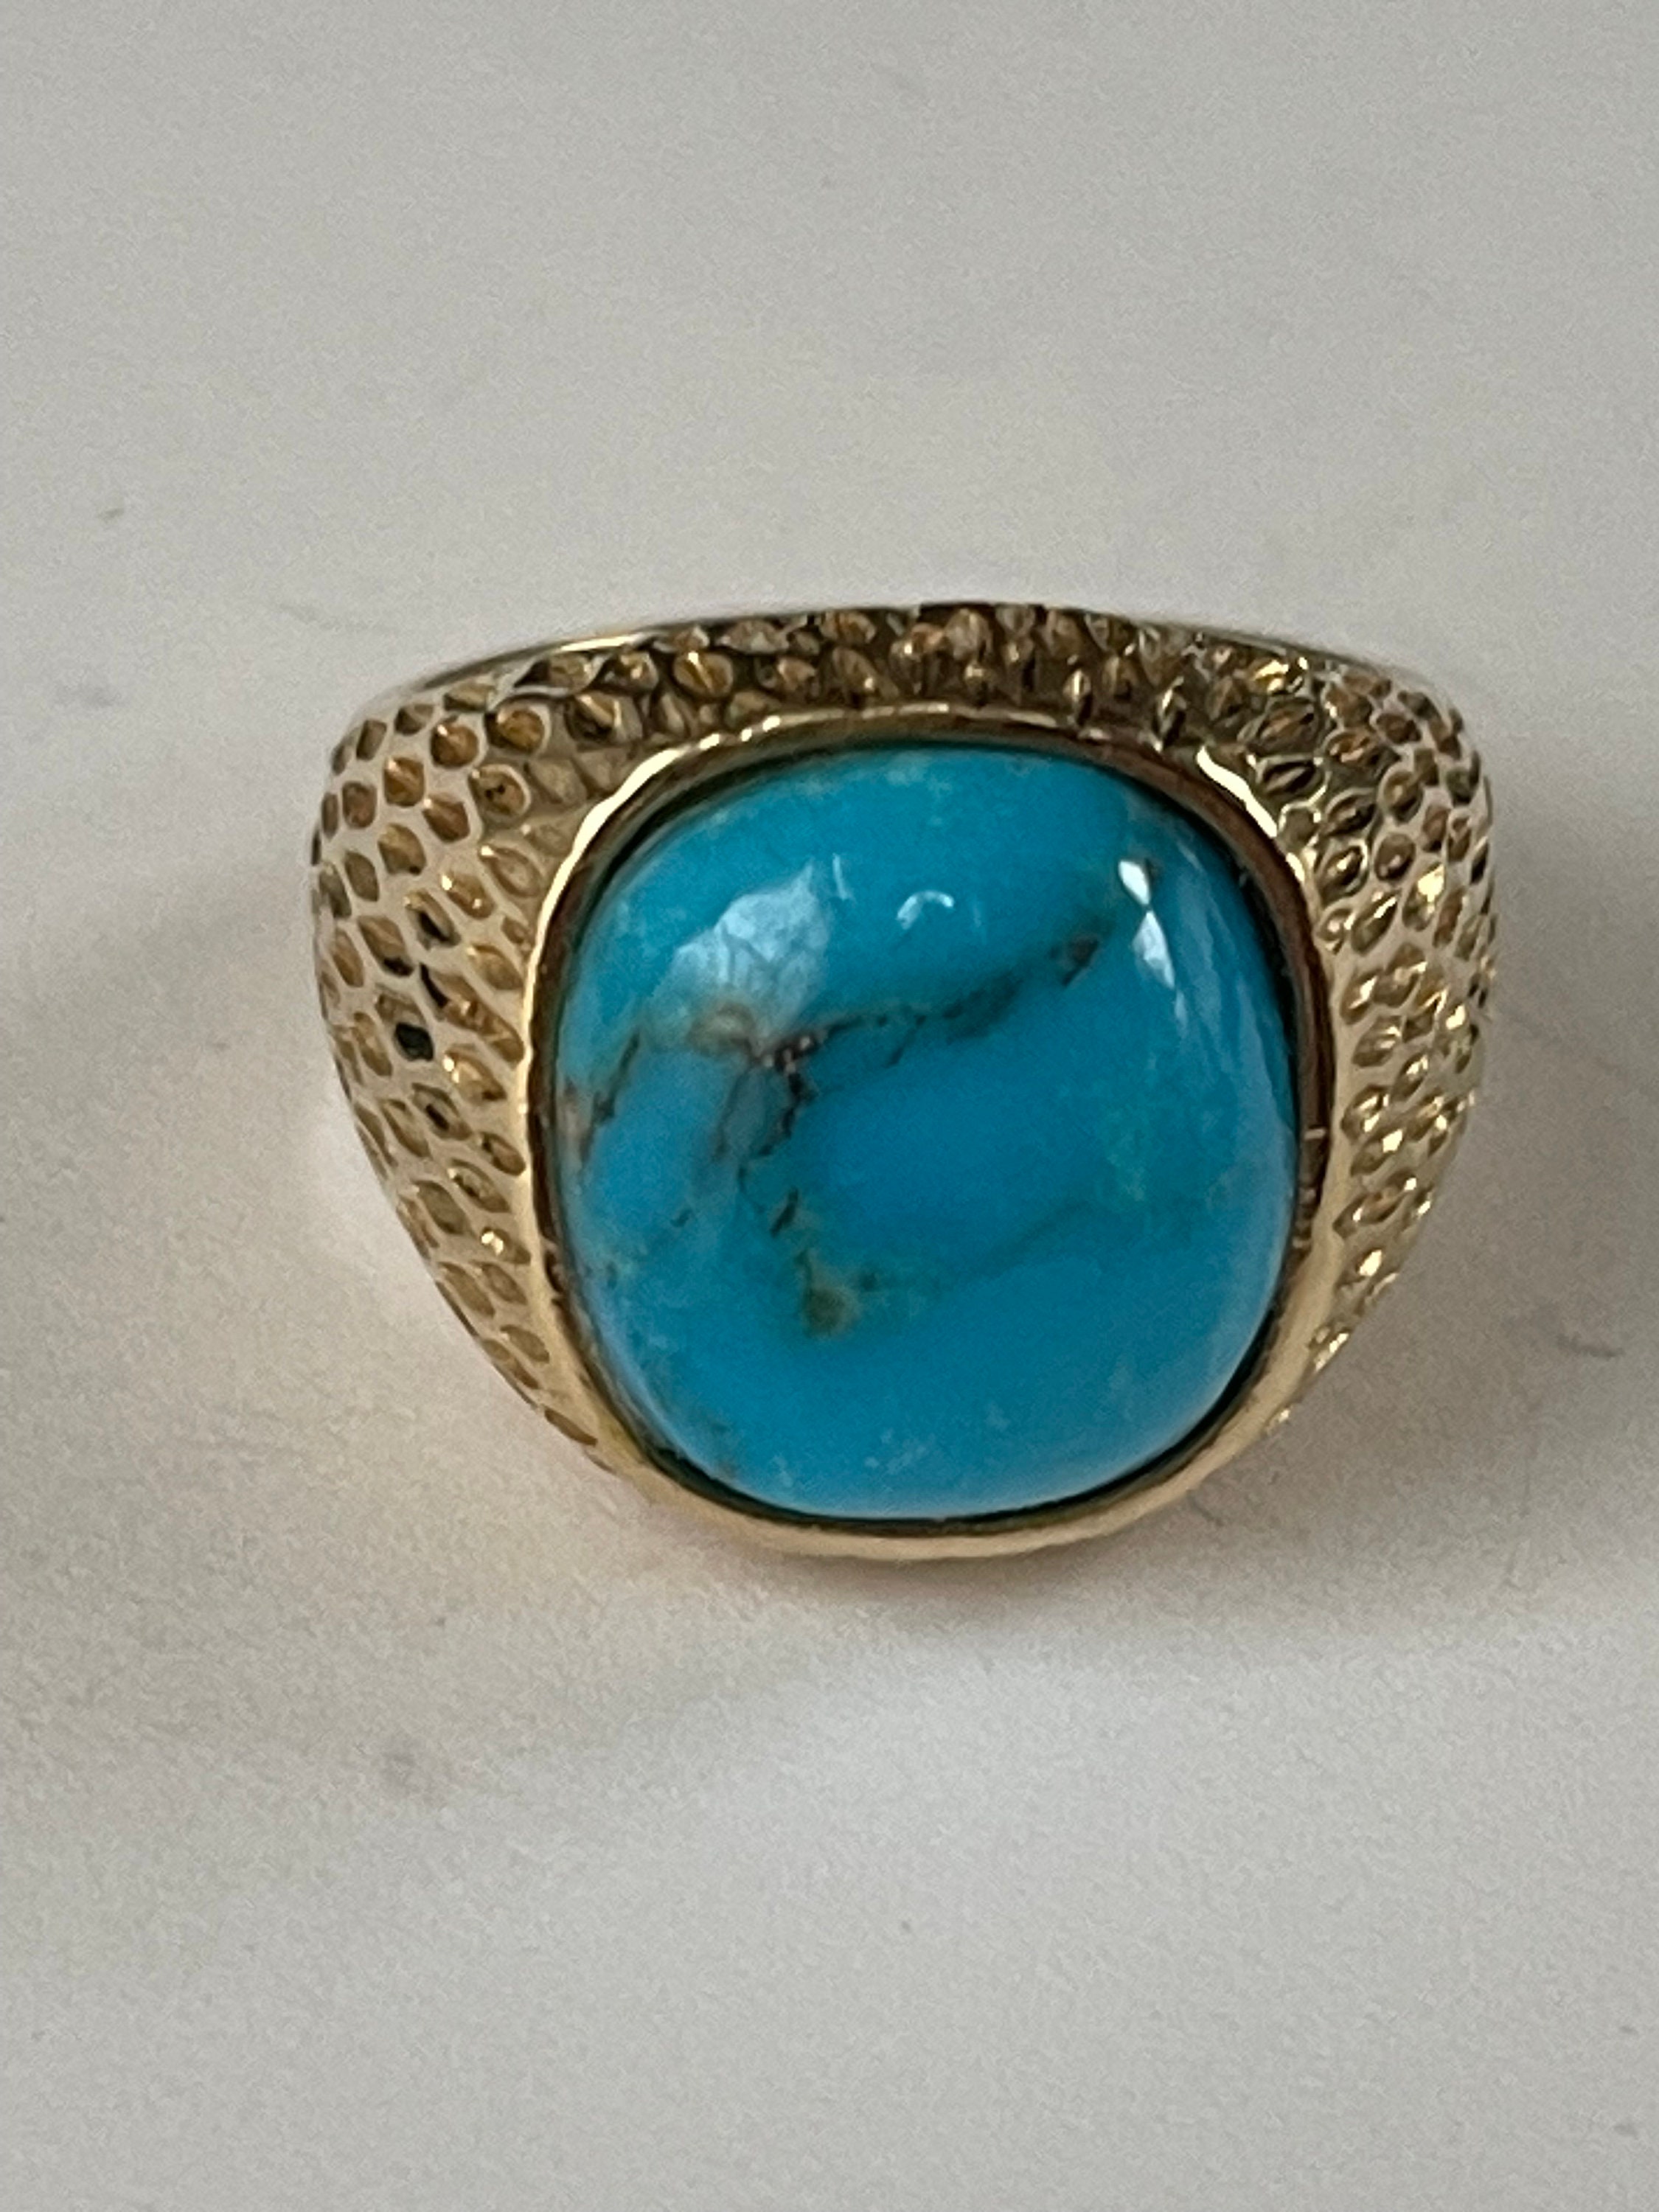 Jewelry with a Past Turquoise Ring 001-200-02651 | Georgetown Jewelers |  Wood Dale, IL